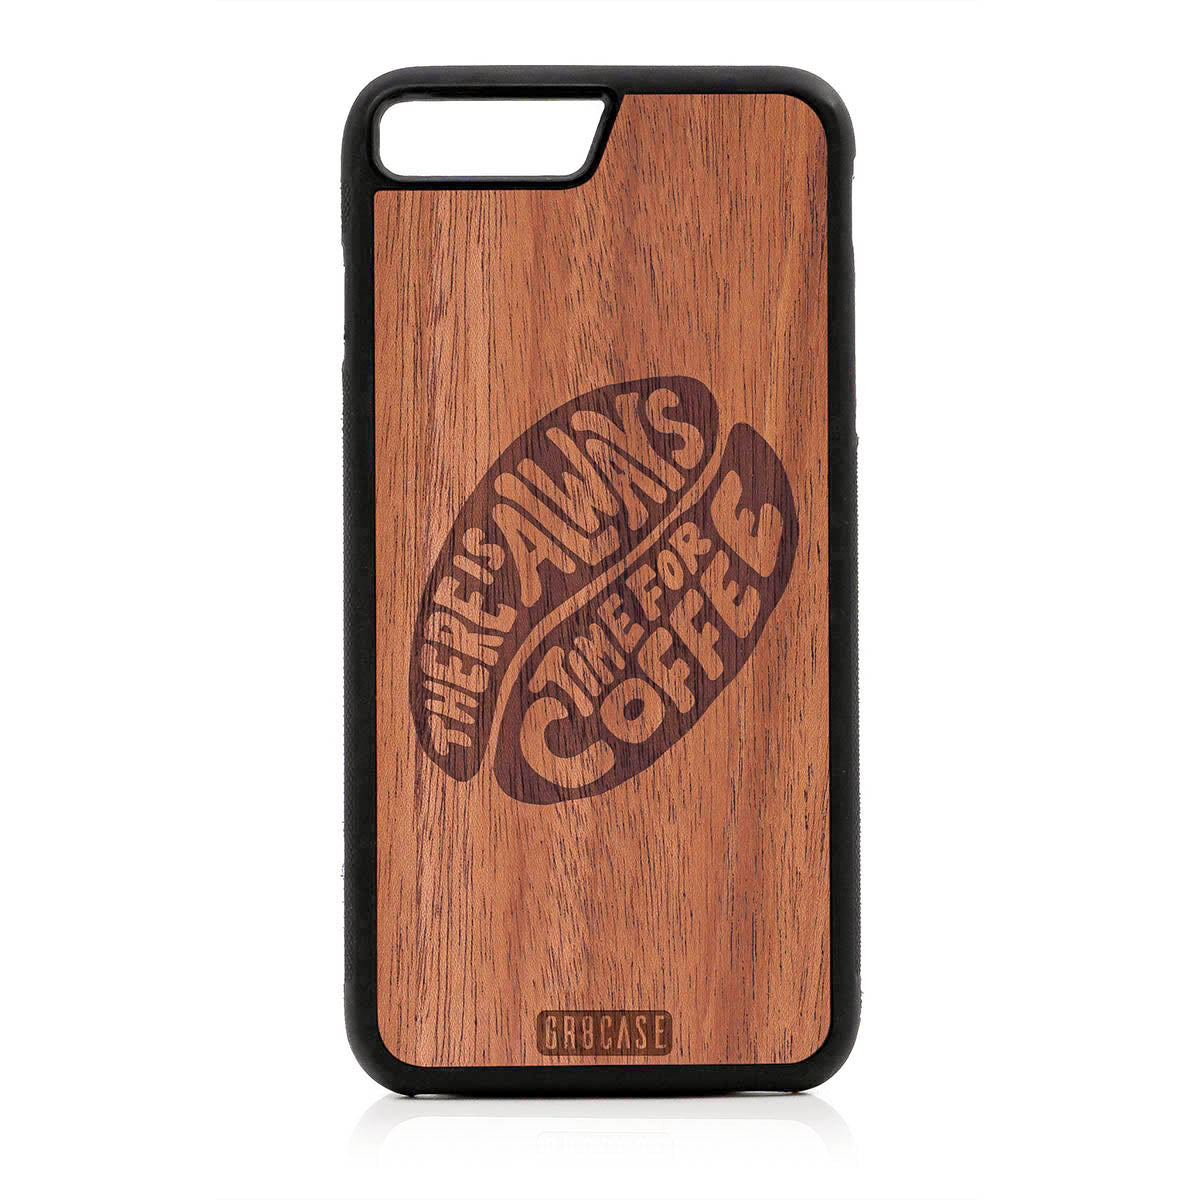 There Is Always Time For Coffee Design Wood Case For iPhone 7 Plus / 8 Plus